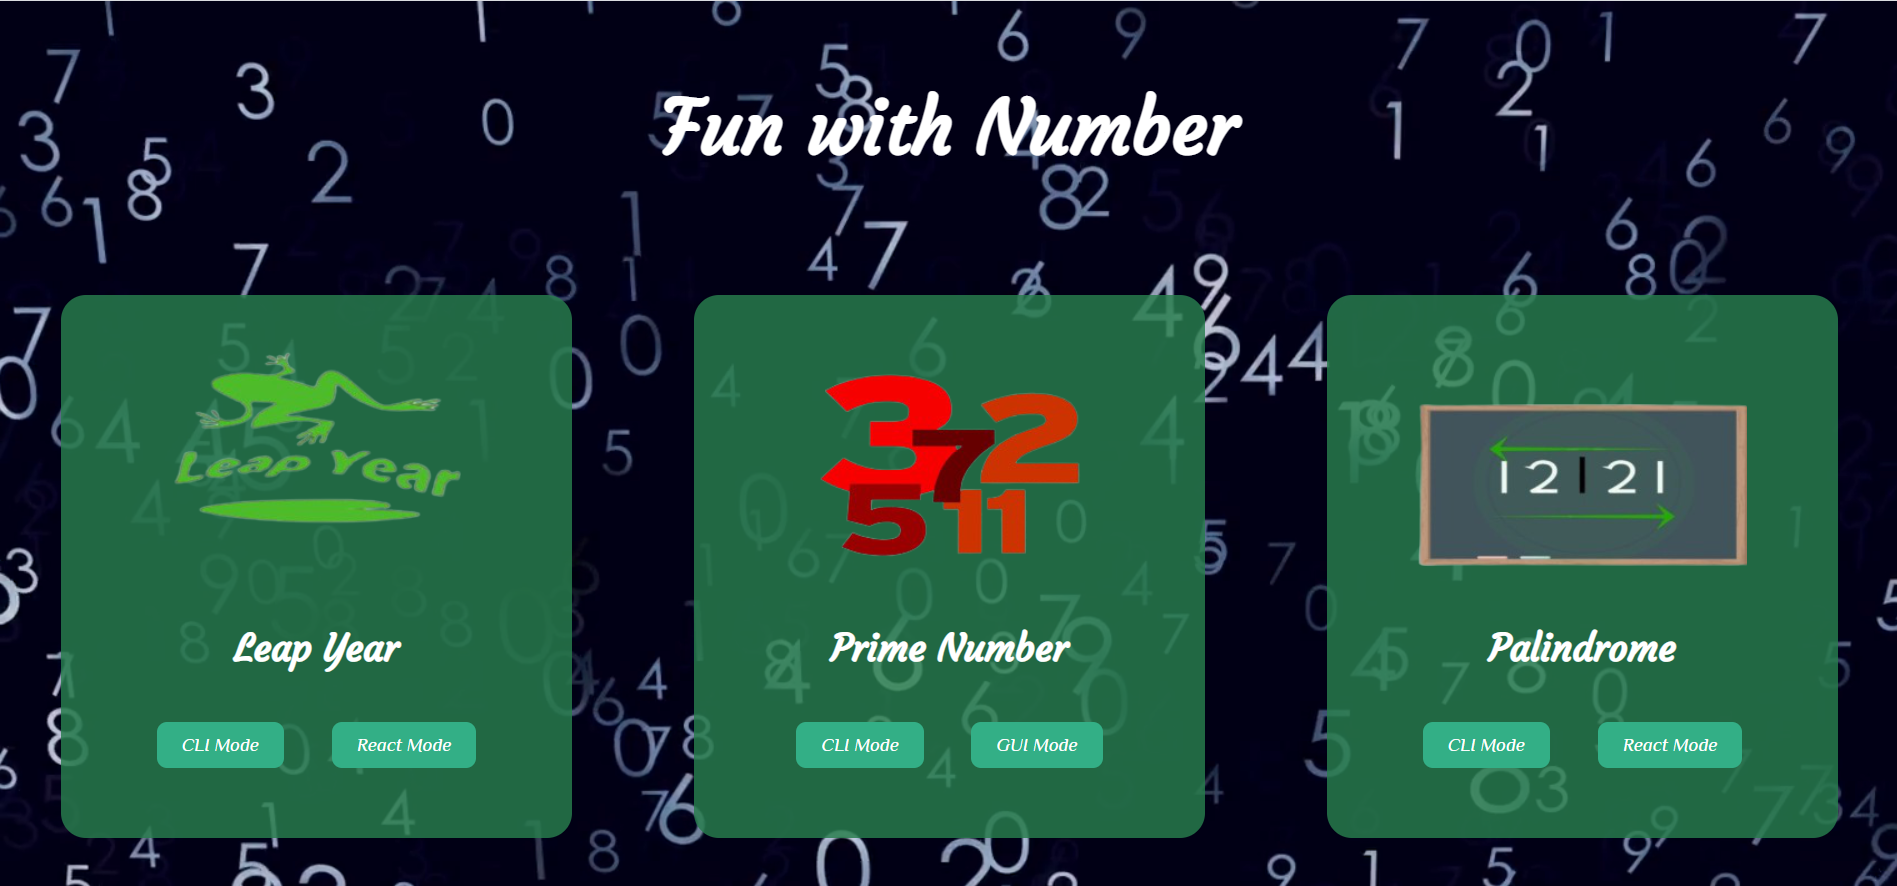 fun with number quiz